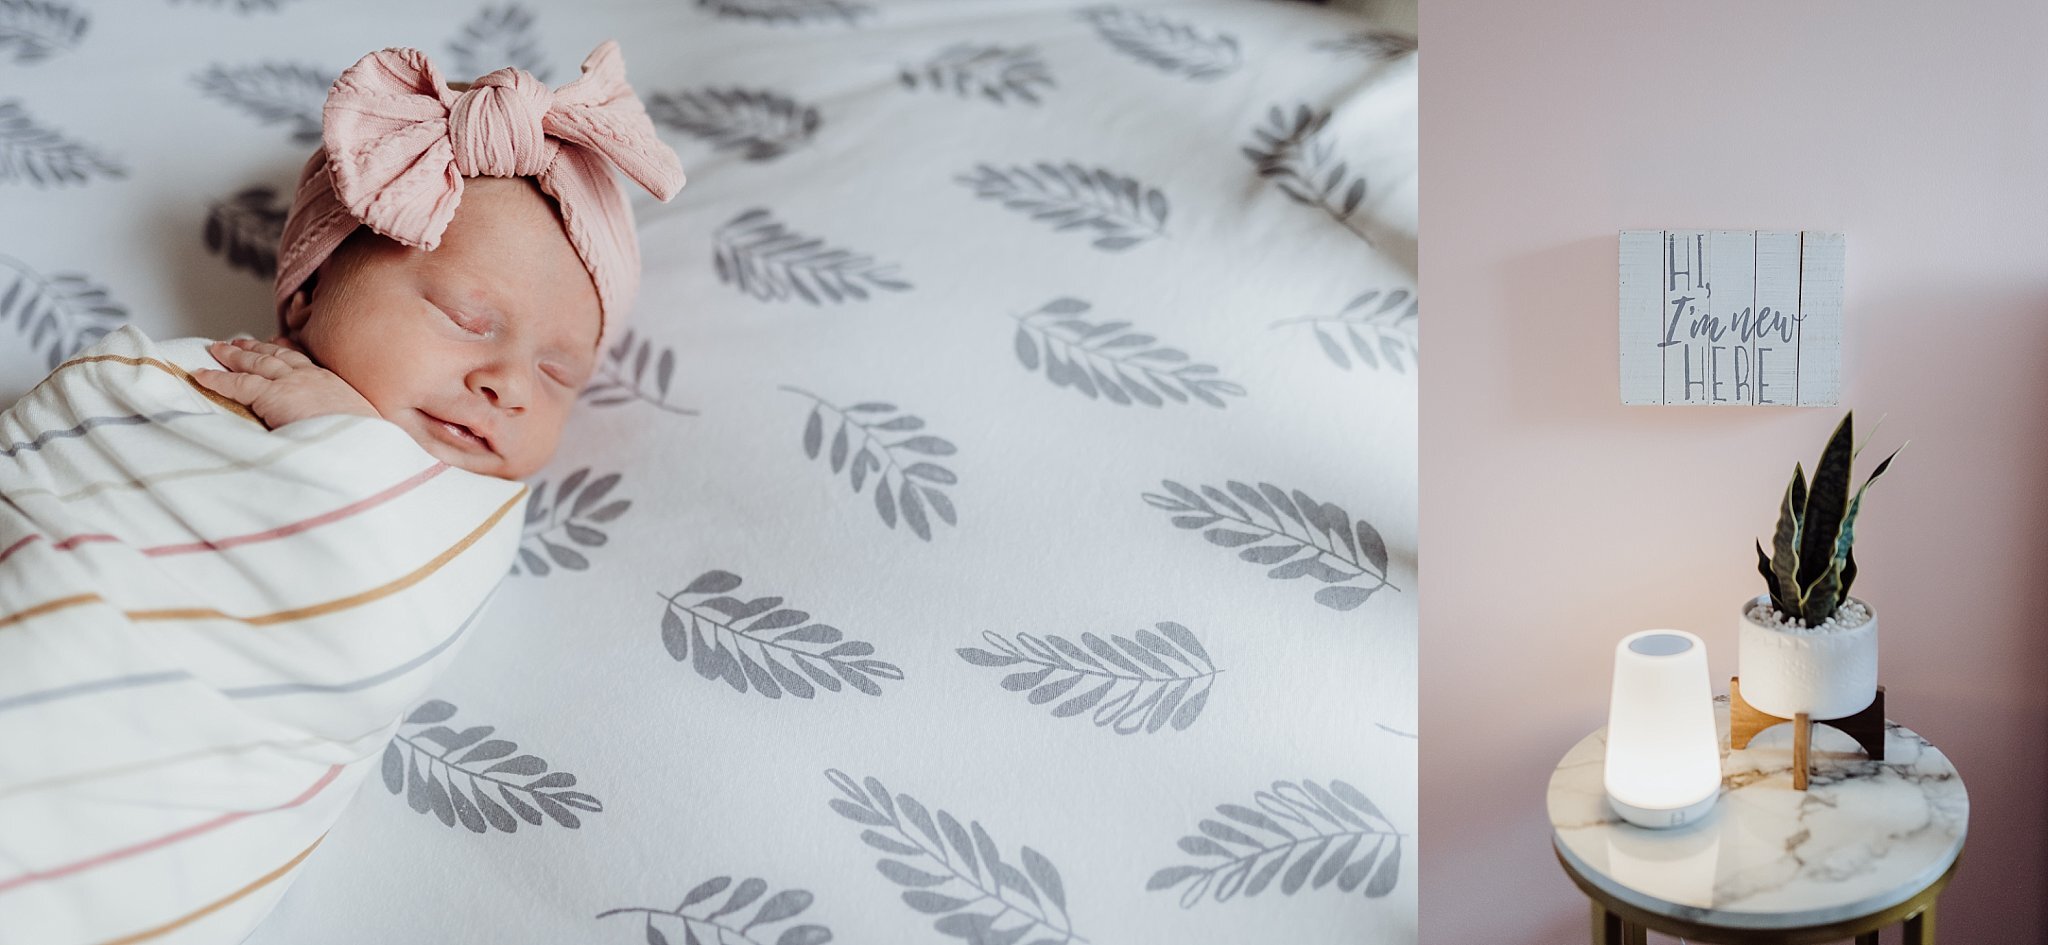 newborn baby girl in crib with gray and white sheets 